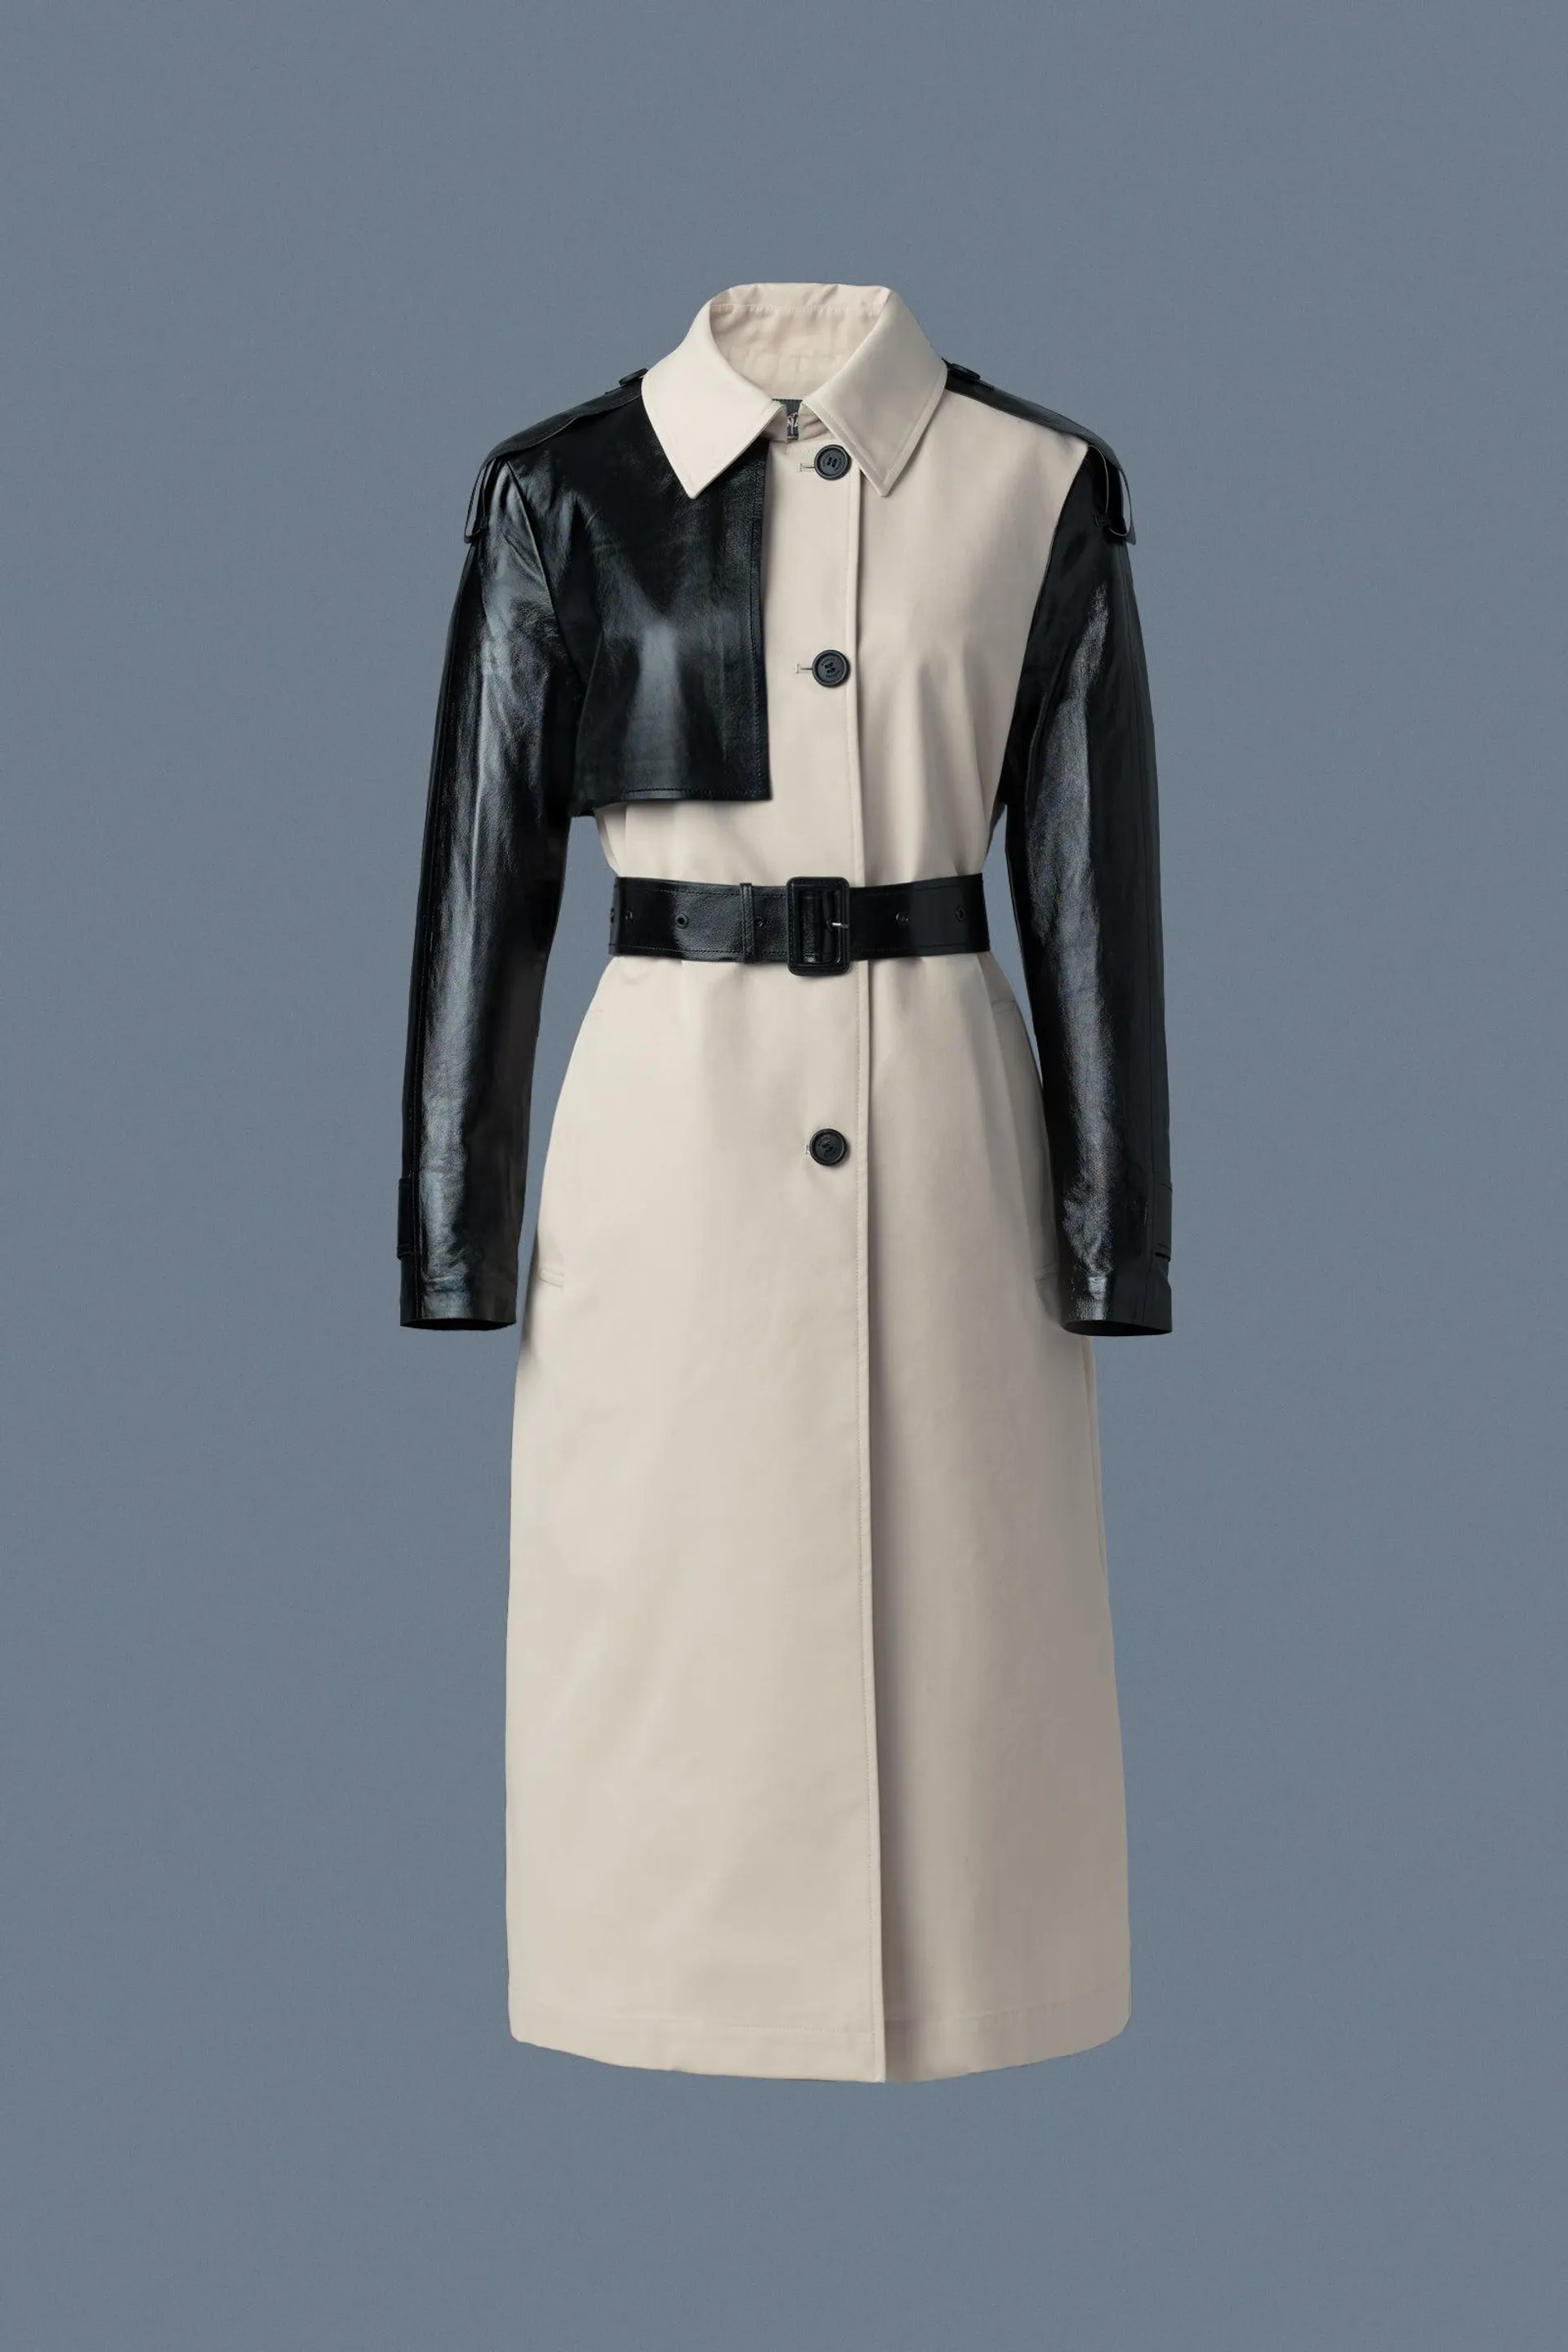 LEIKO Maxi Two-Toned Twill & Leather Trench